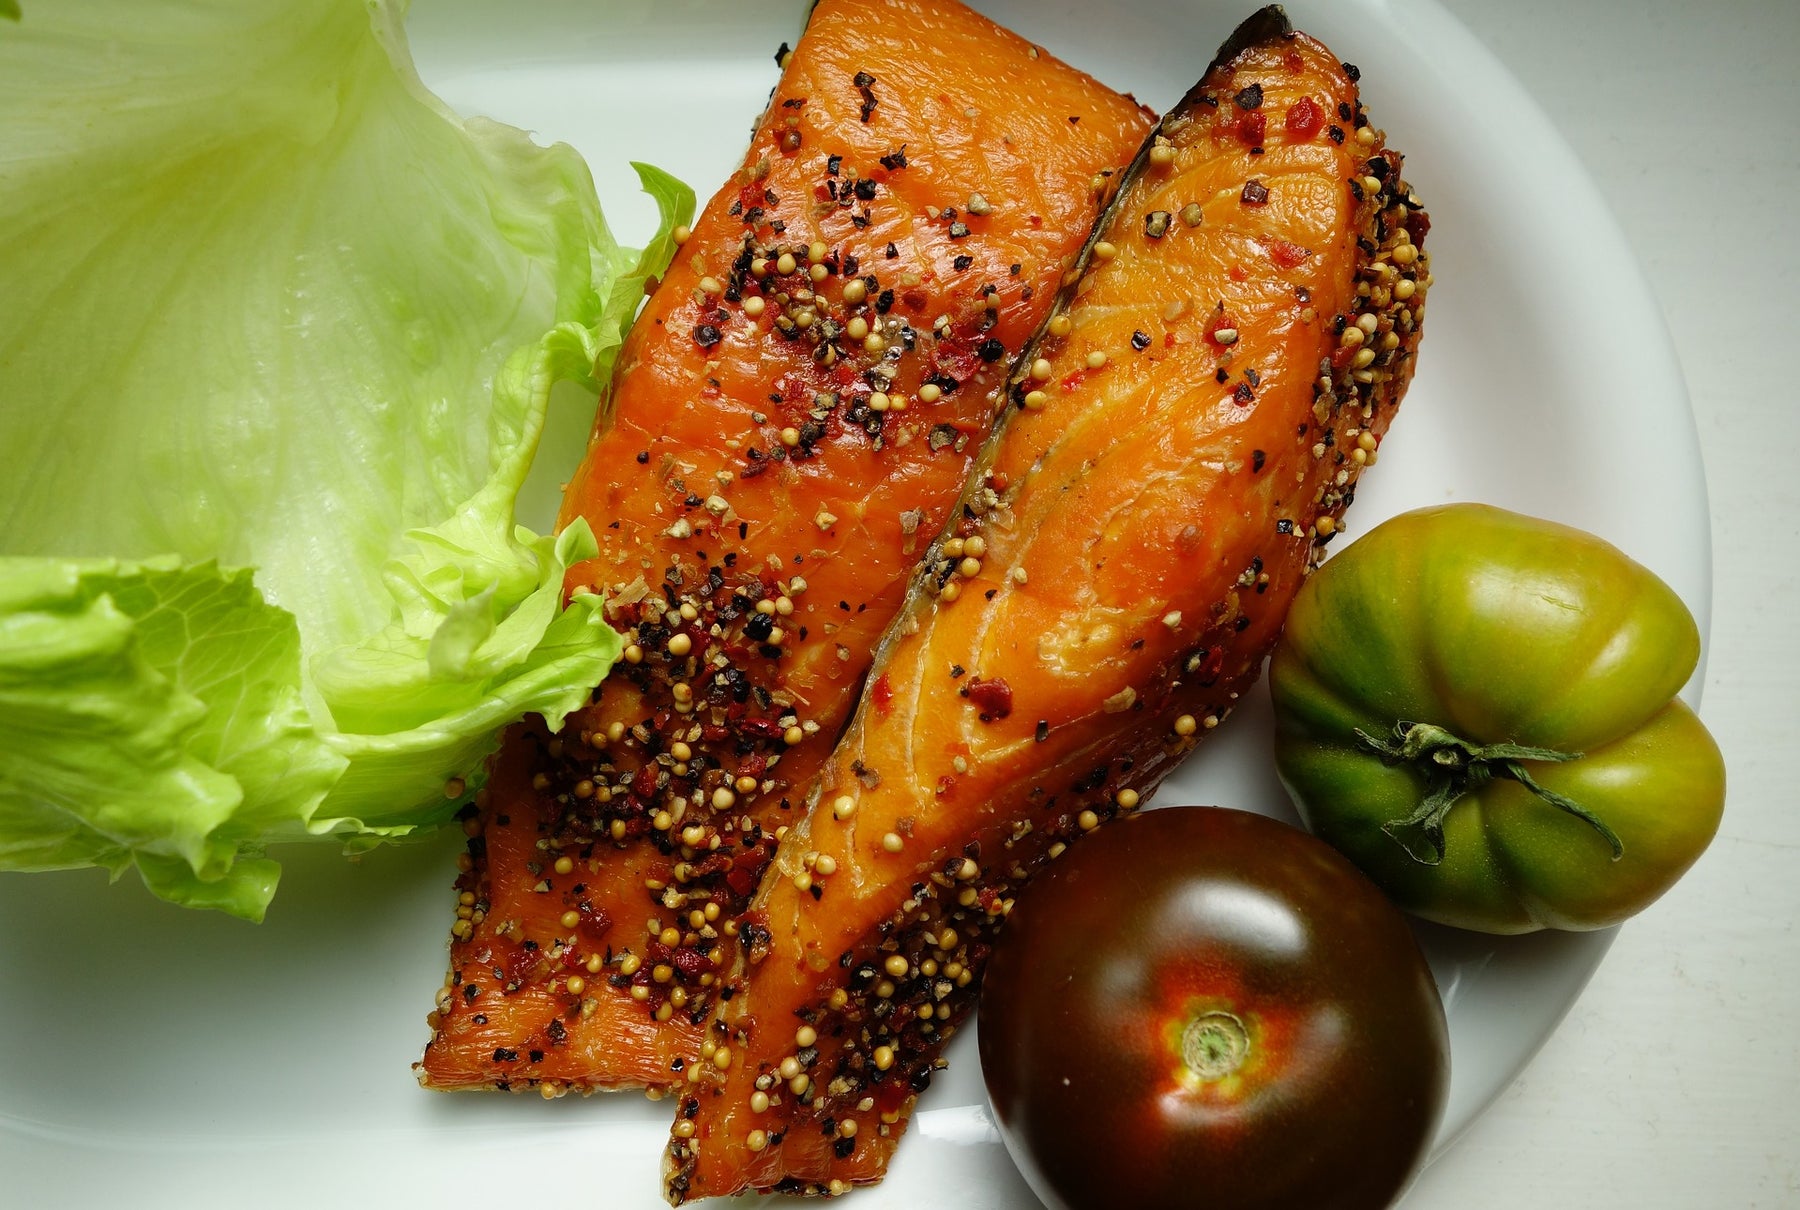 Salmon with salad and tomatoes on a plate